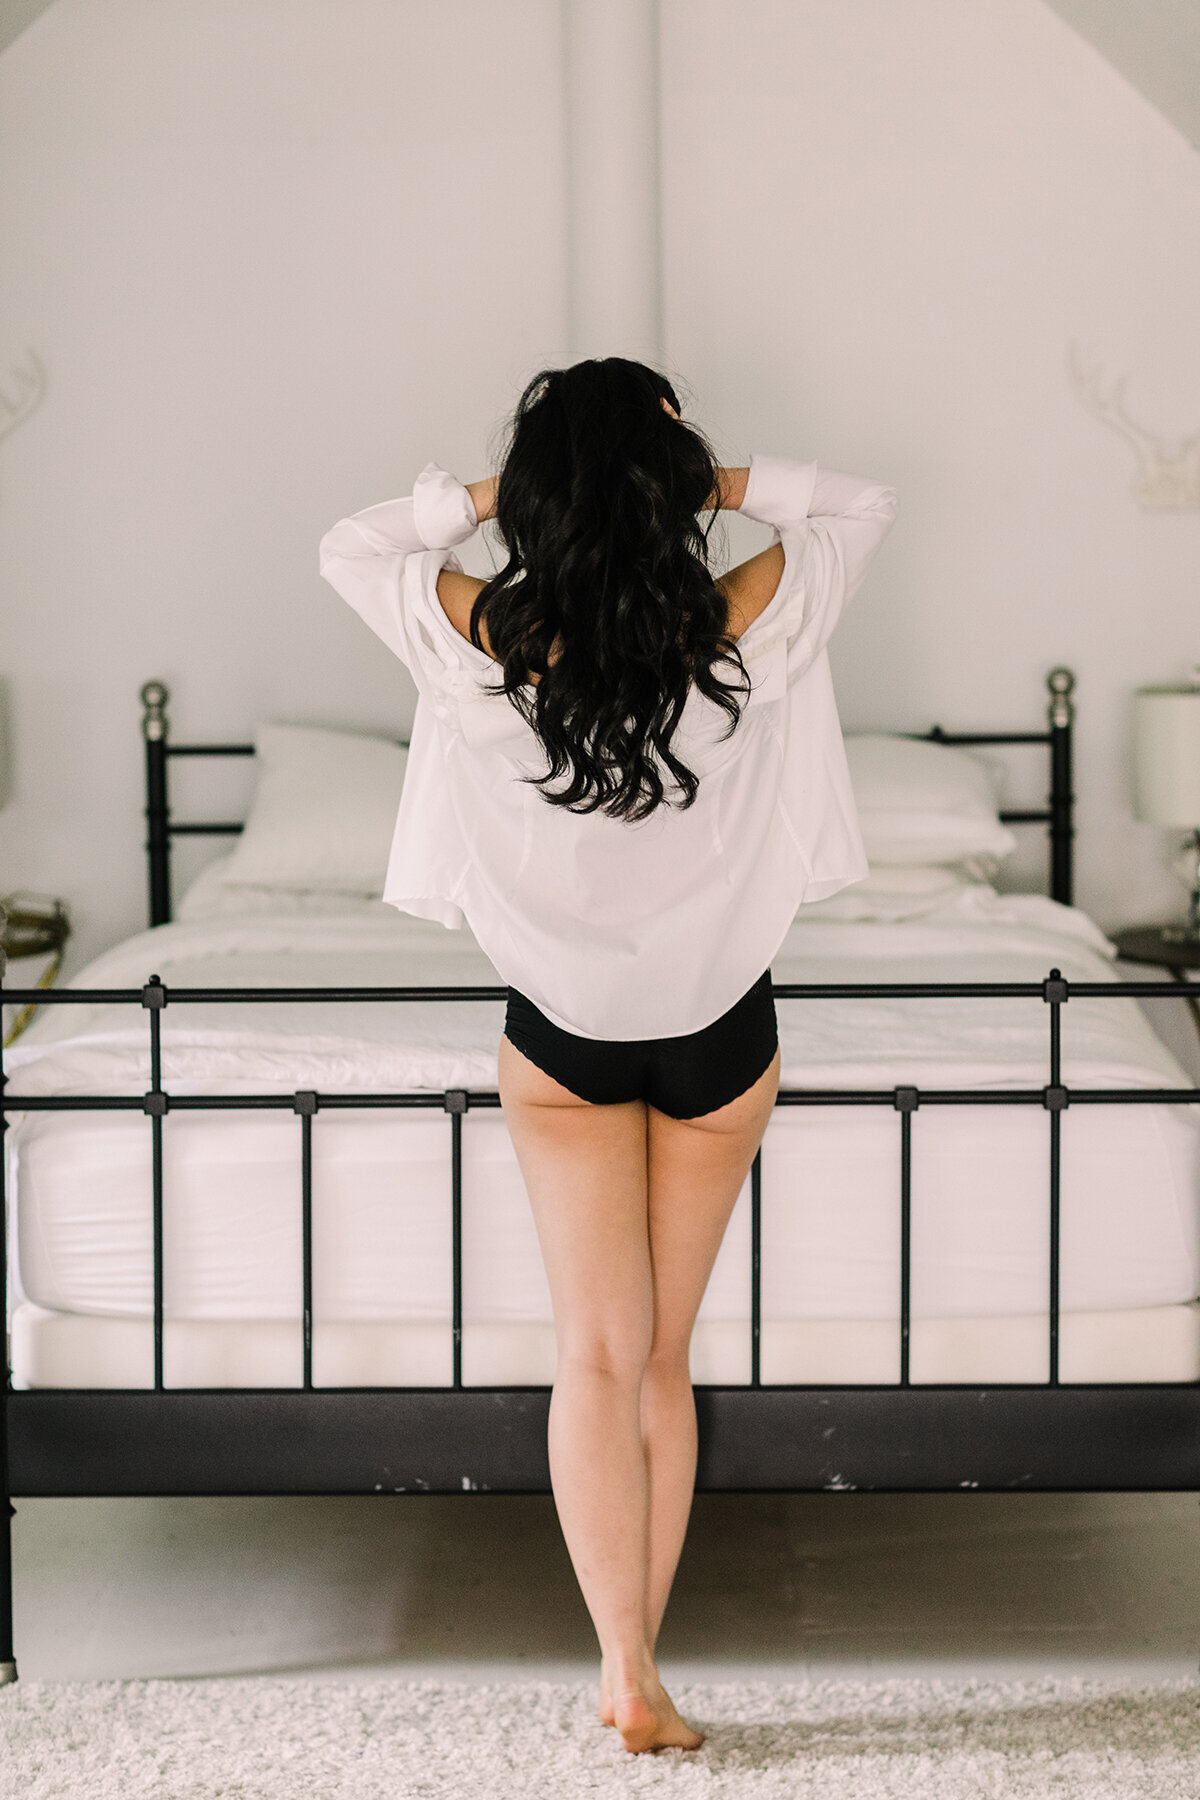 A simple white button down shirt is the perfect wardrobe accessory for a boudoir session.